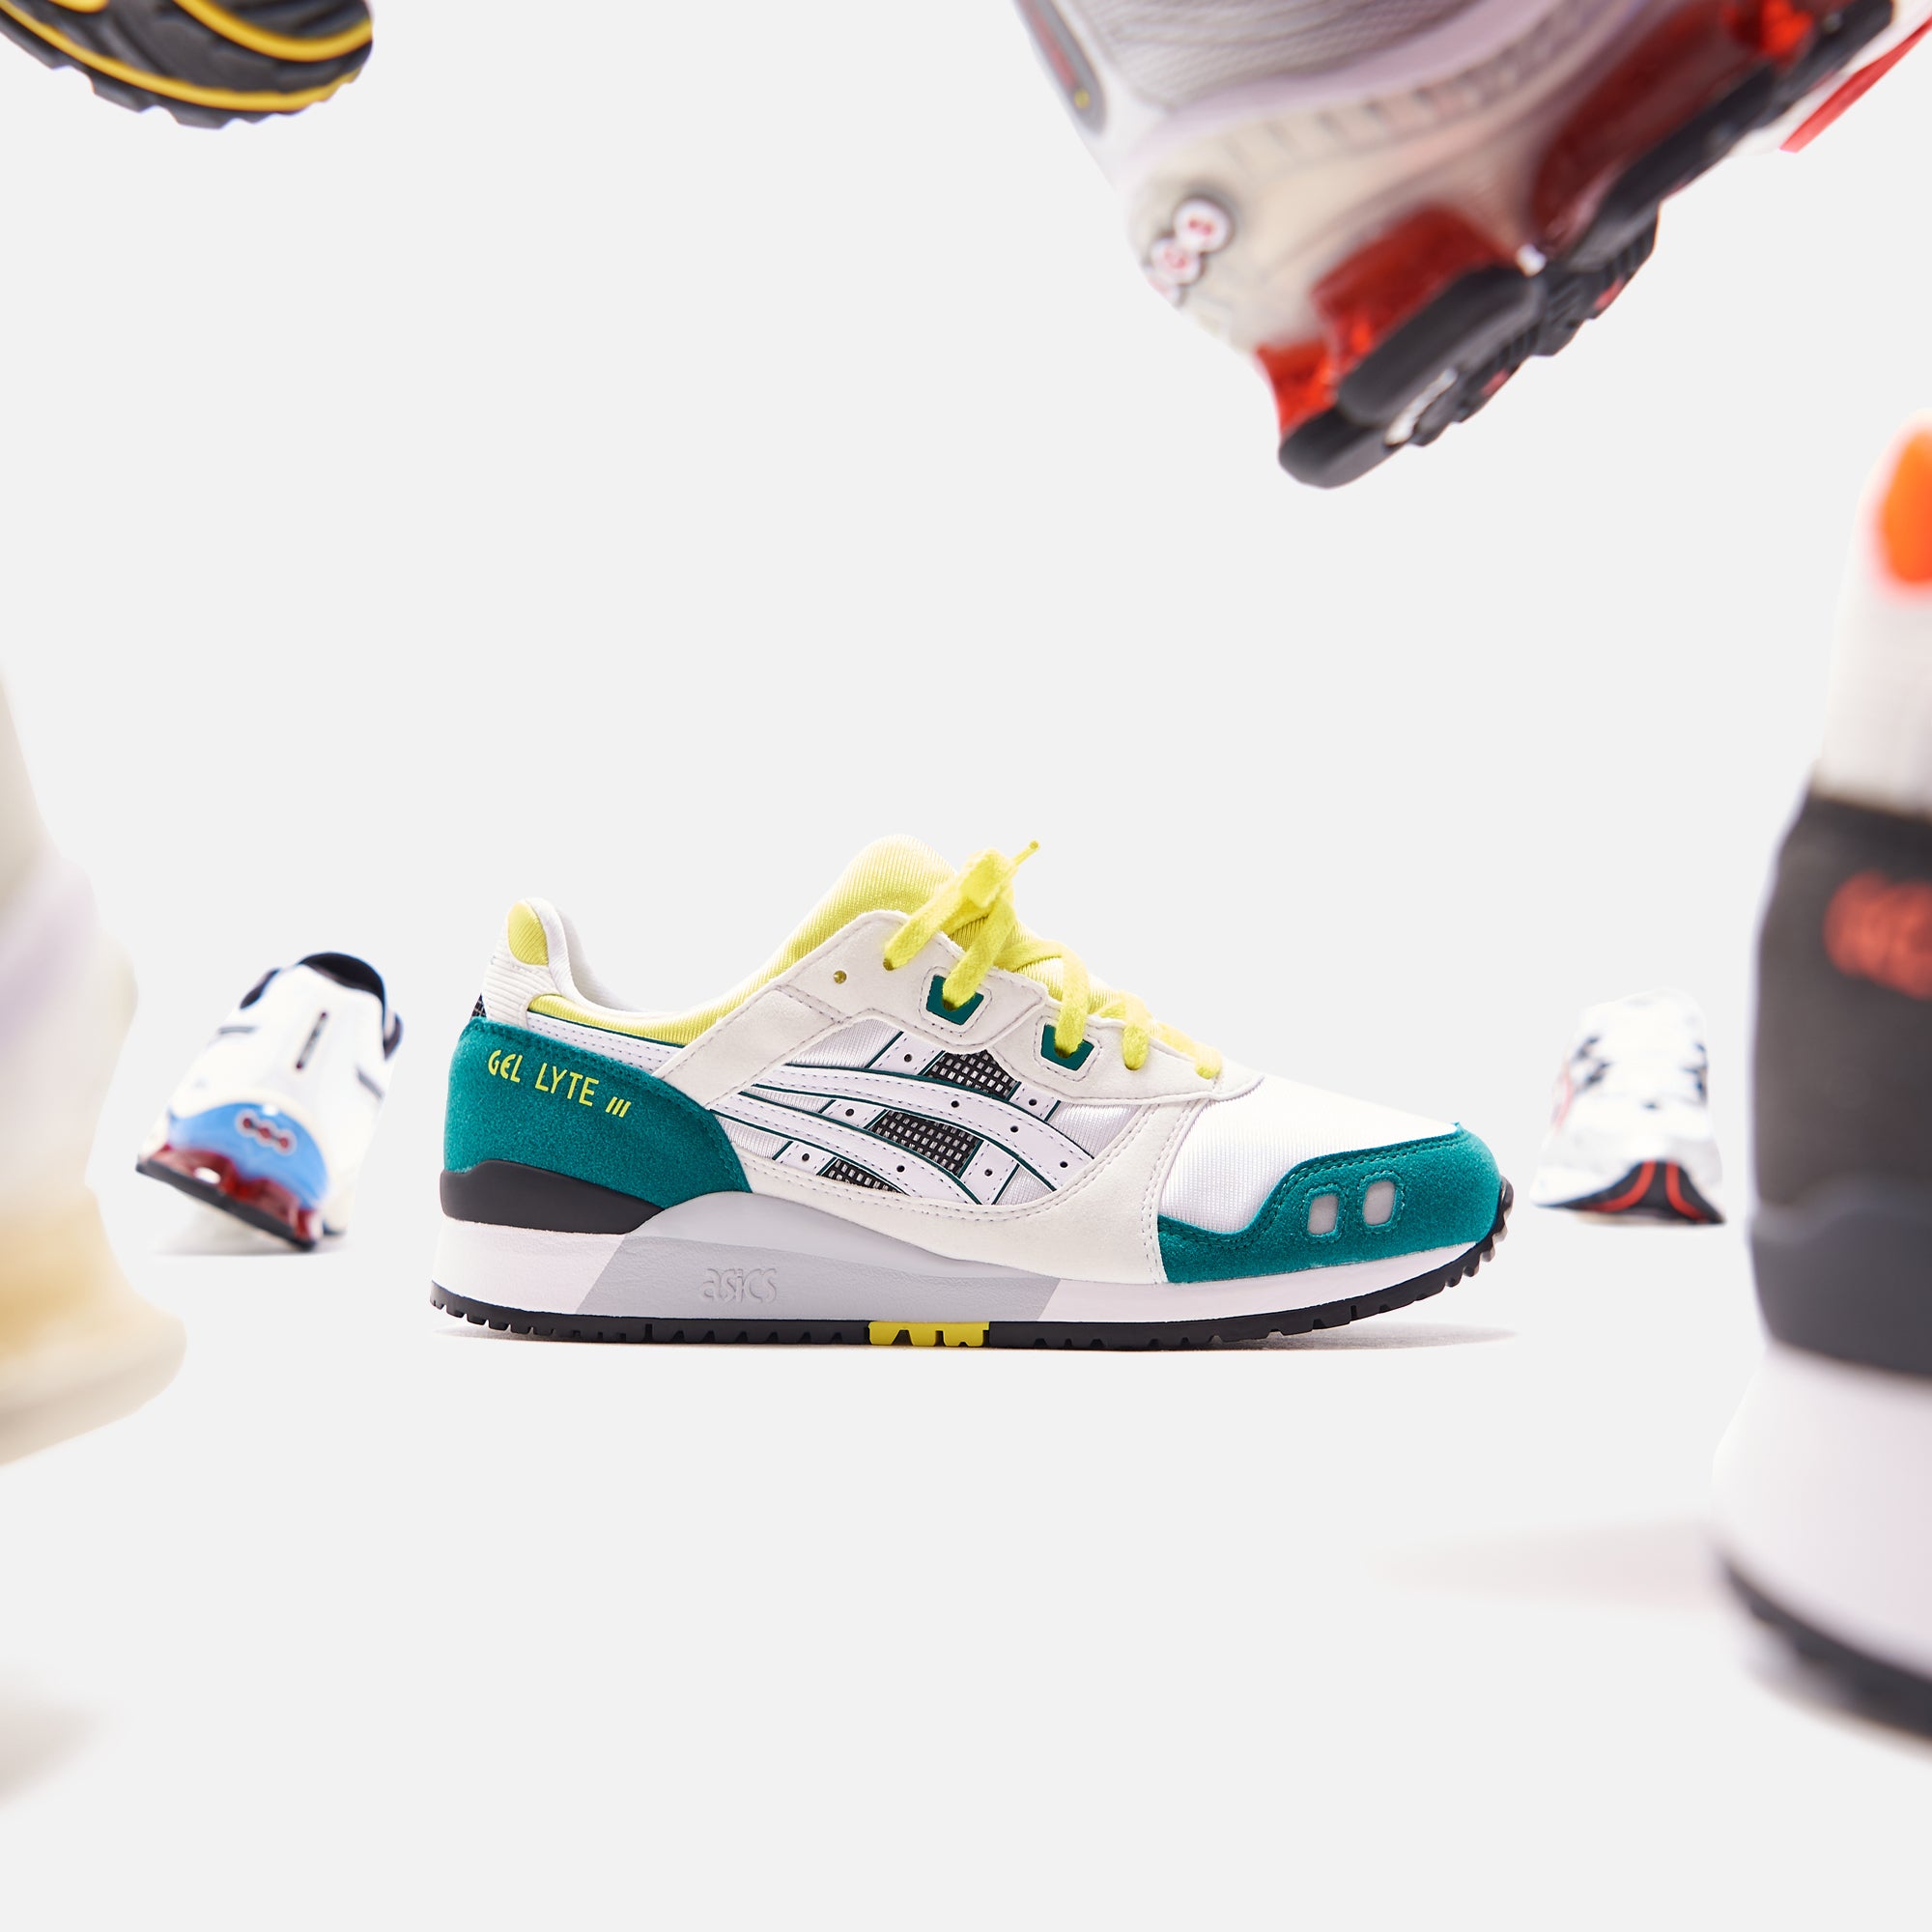 Asics Gel Collection – Kith